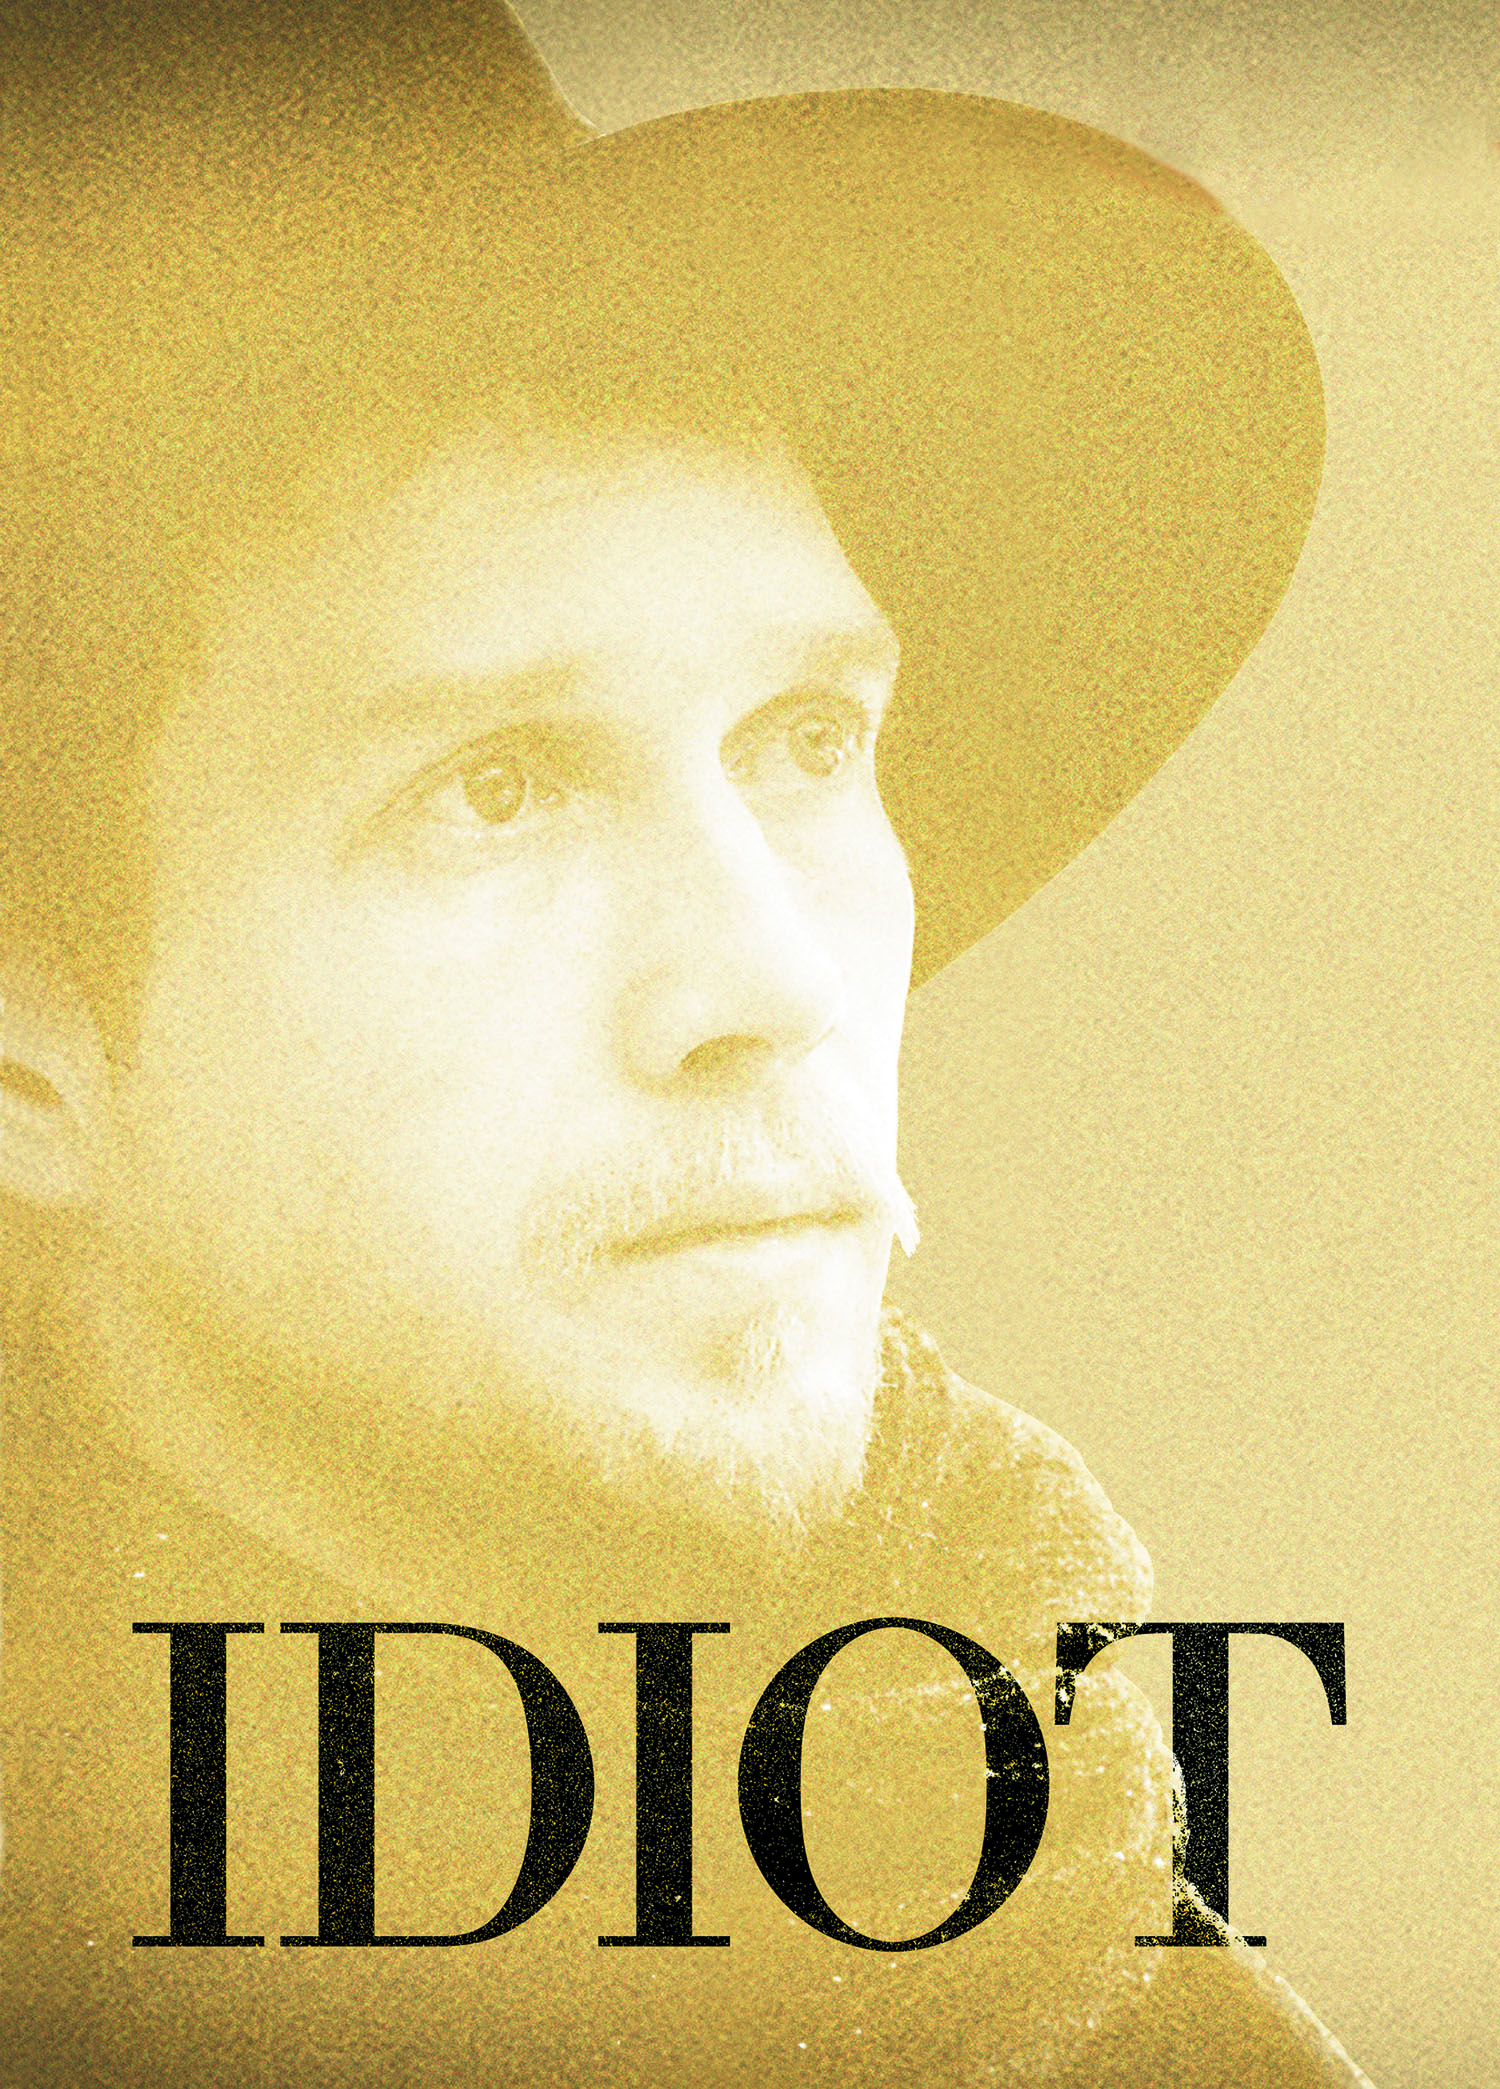 THE "IDIOT" SERIES TO BE BROADCASTED IN SWEDEN